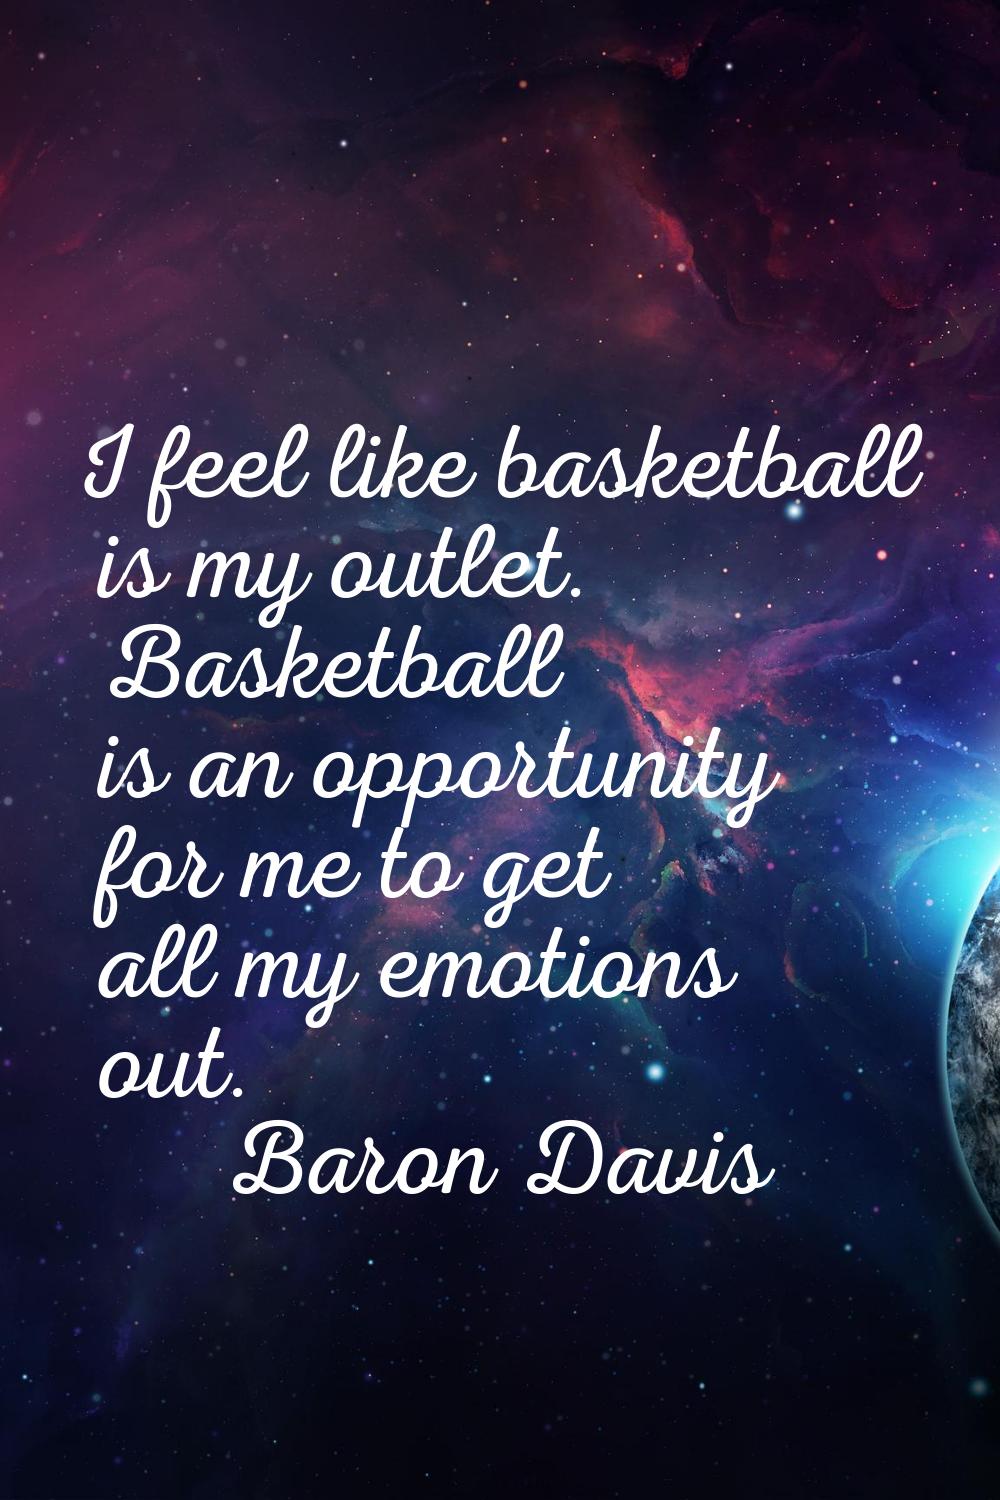 I feel like basketball is my outlet. Basketball is an opportunity for me to get all my emotions out